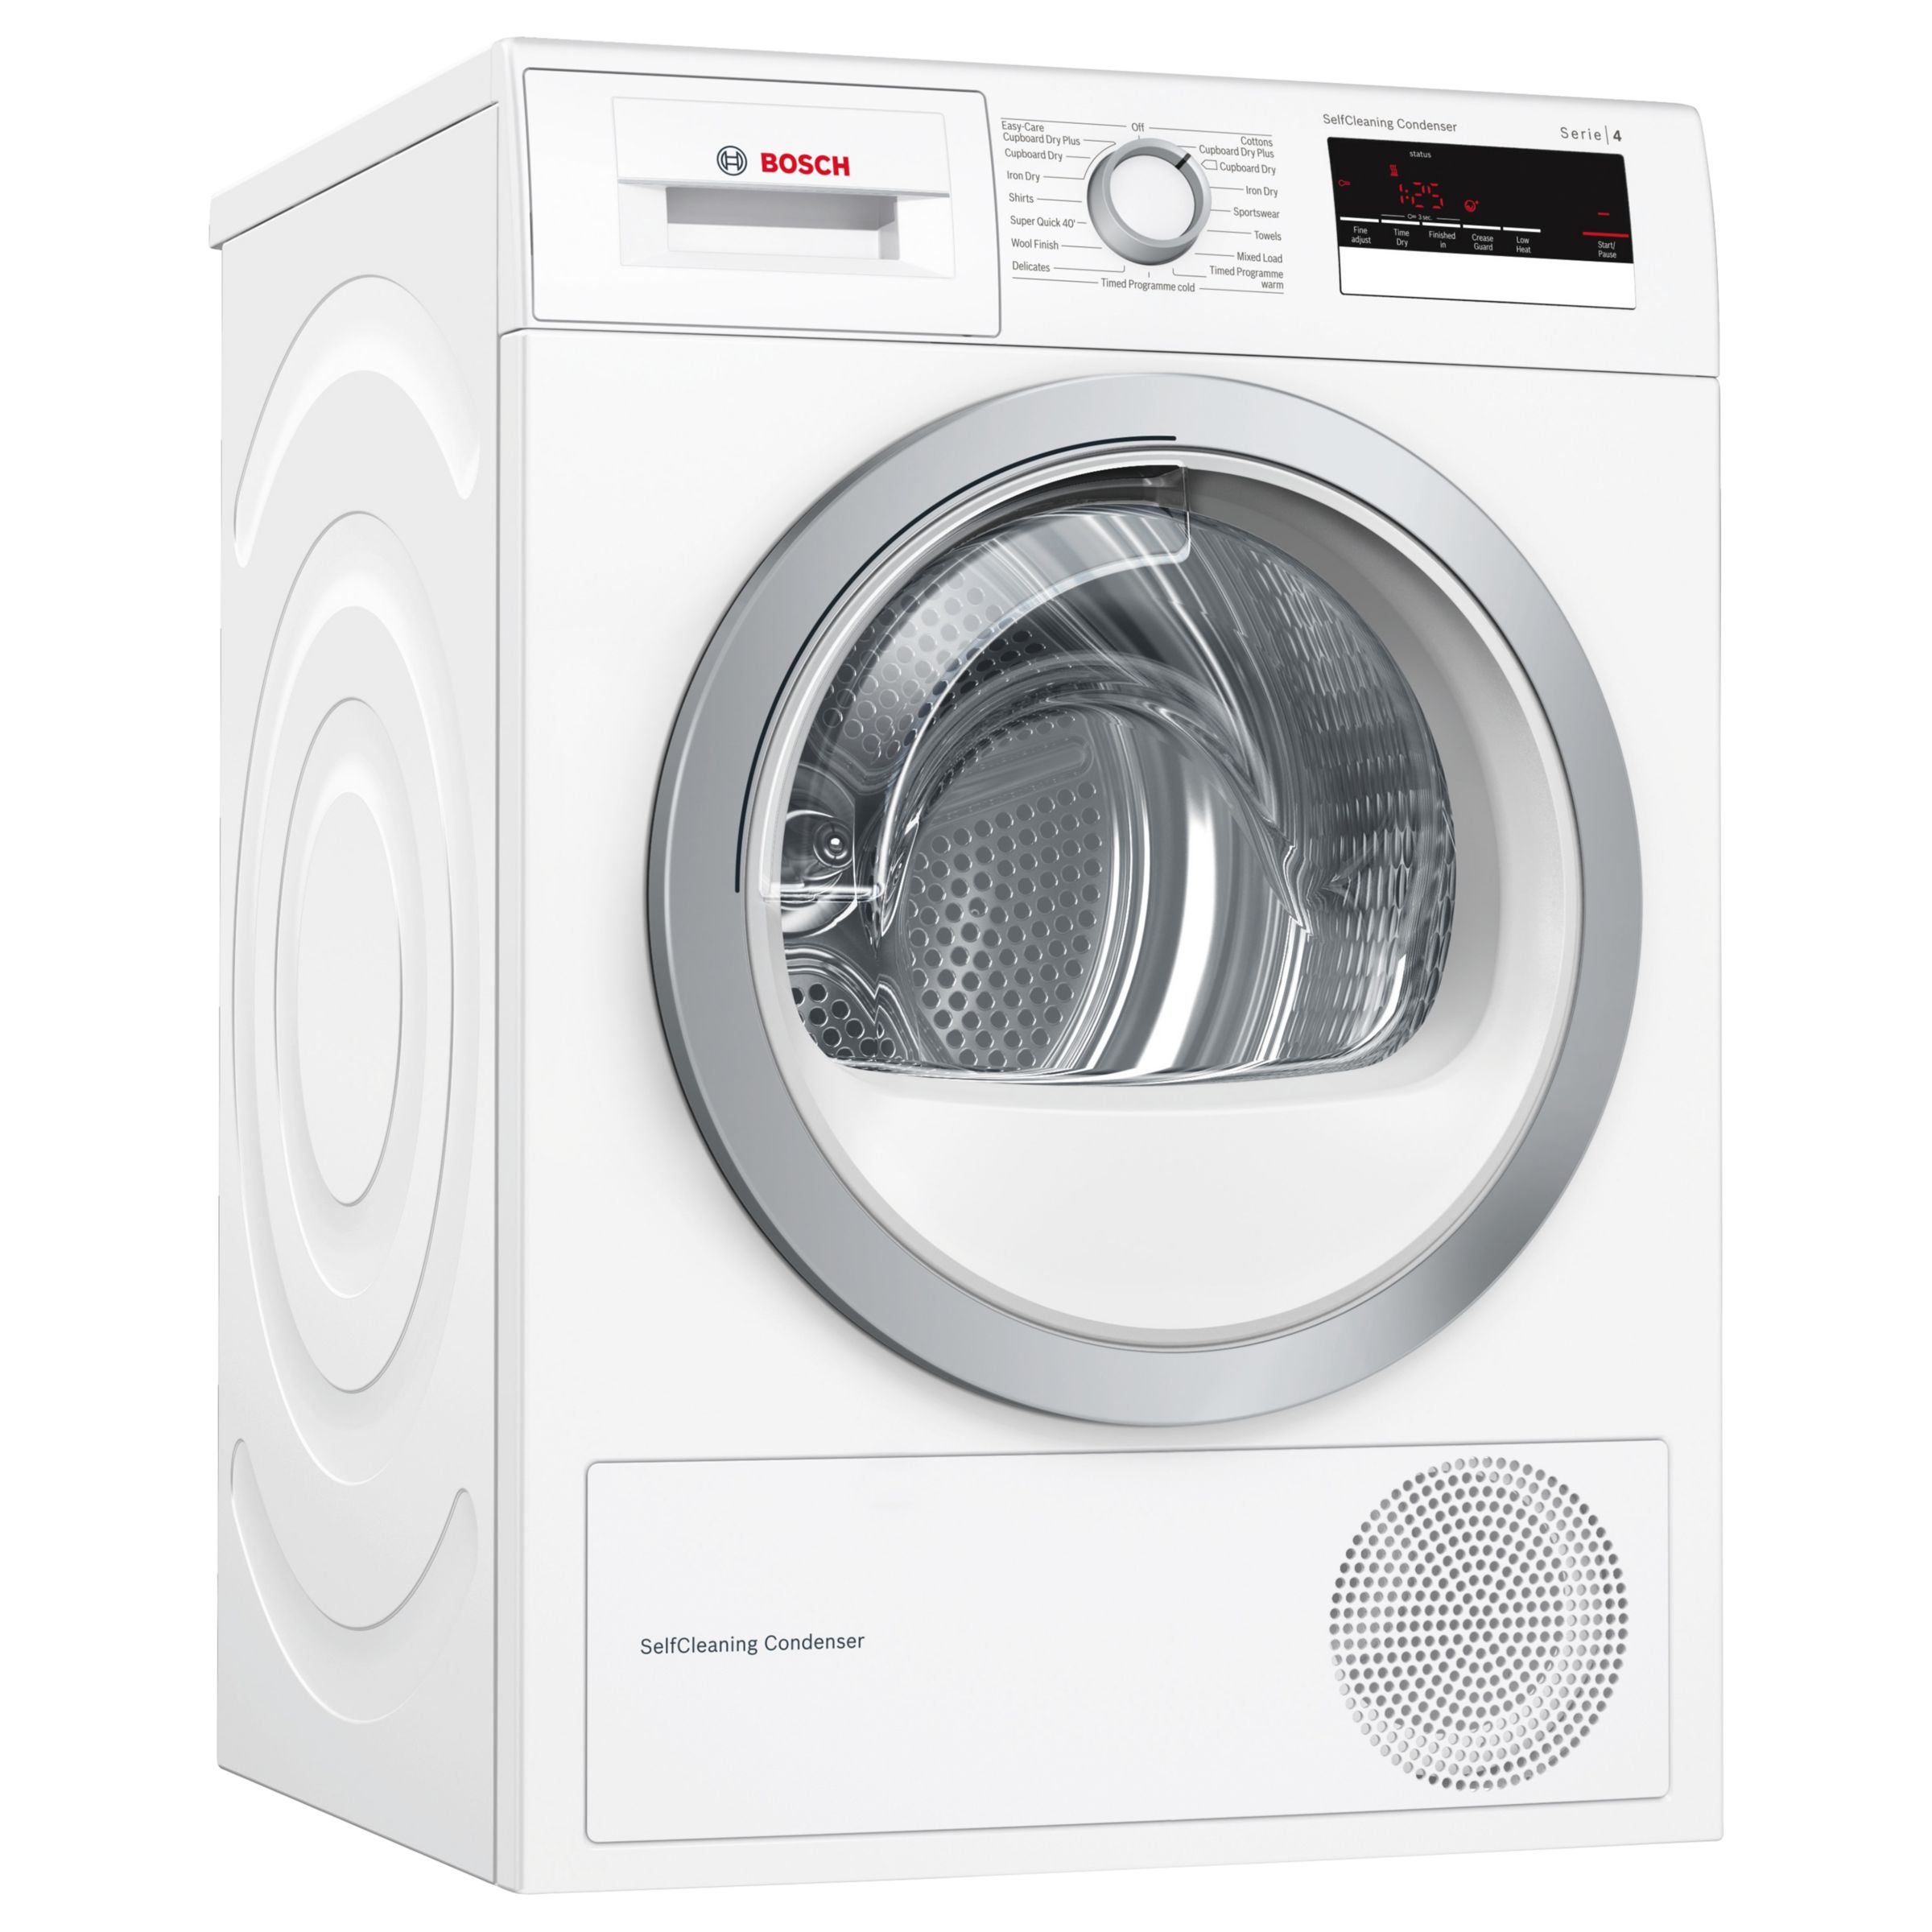 Bosch WTM85230GB Condenser Tumble Dryer with Heat Pump, 8kg Load, A++ Energy Rating, White